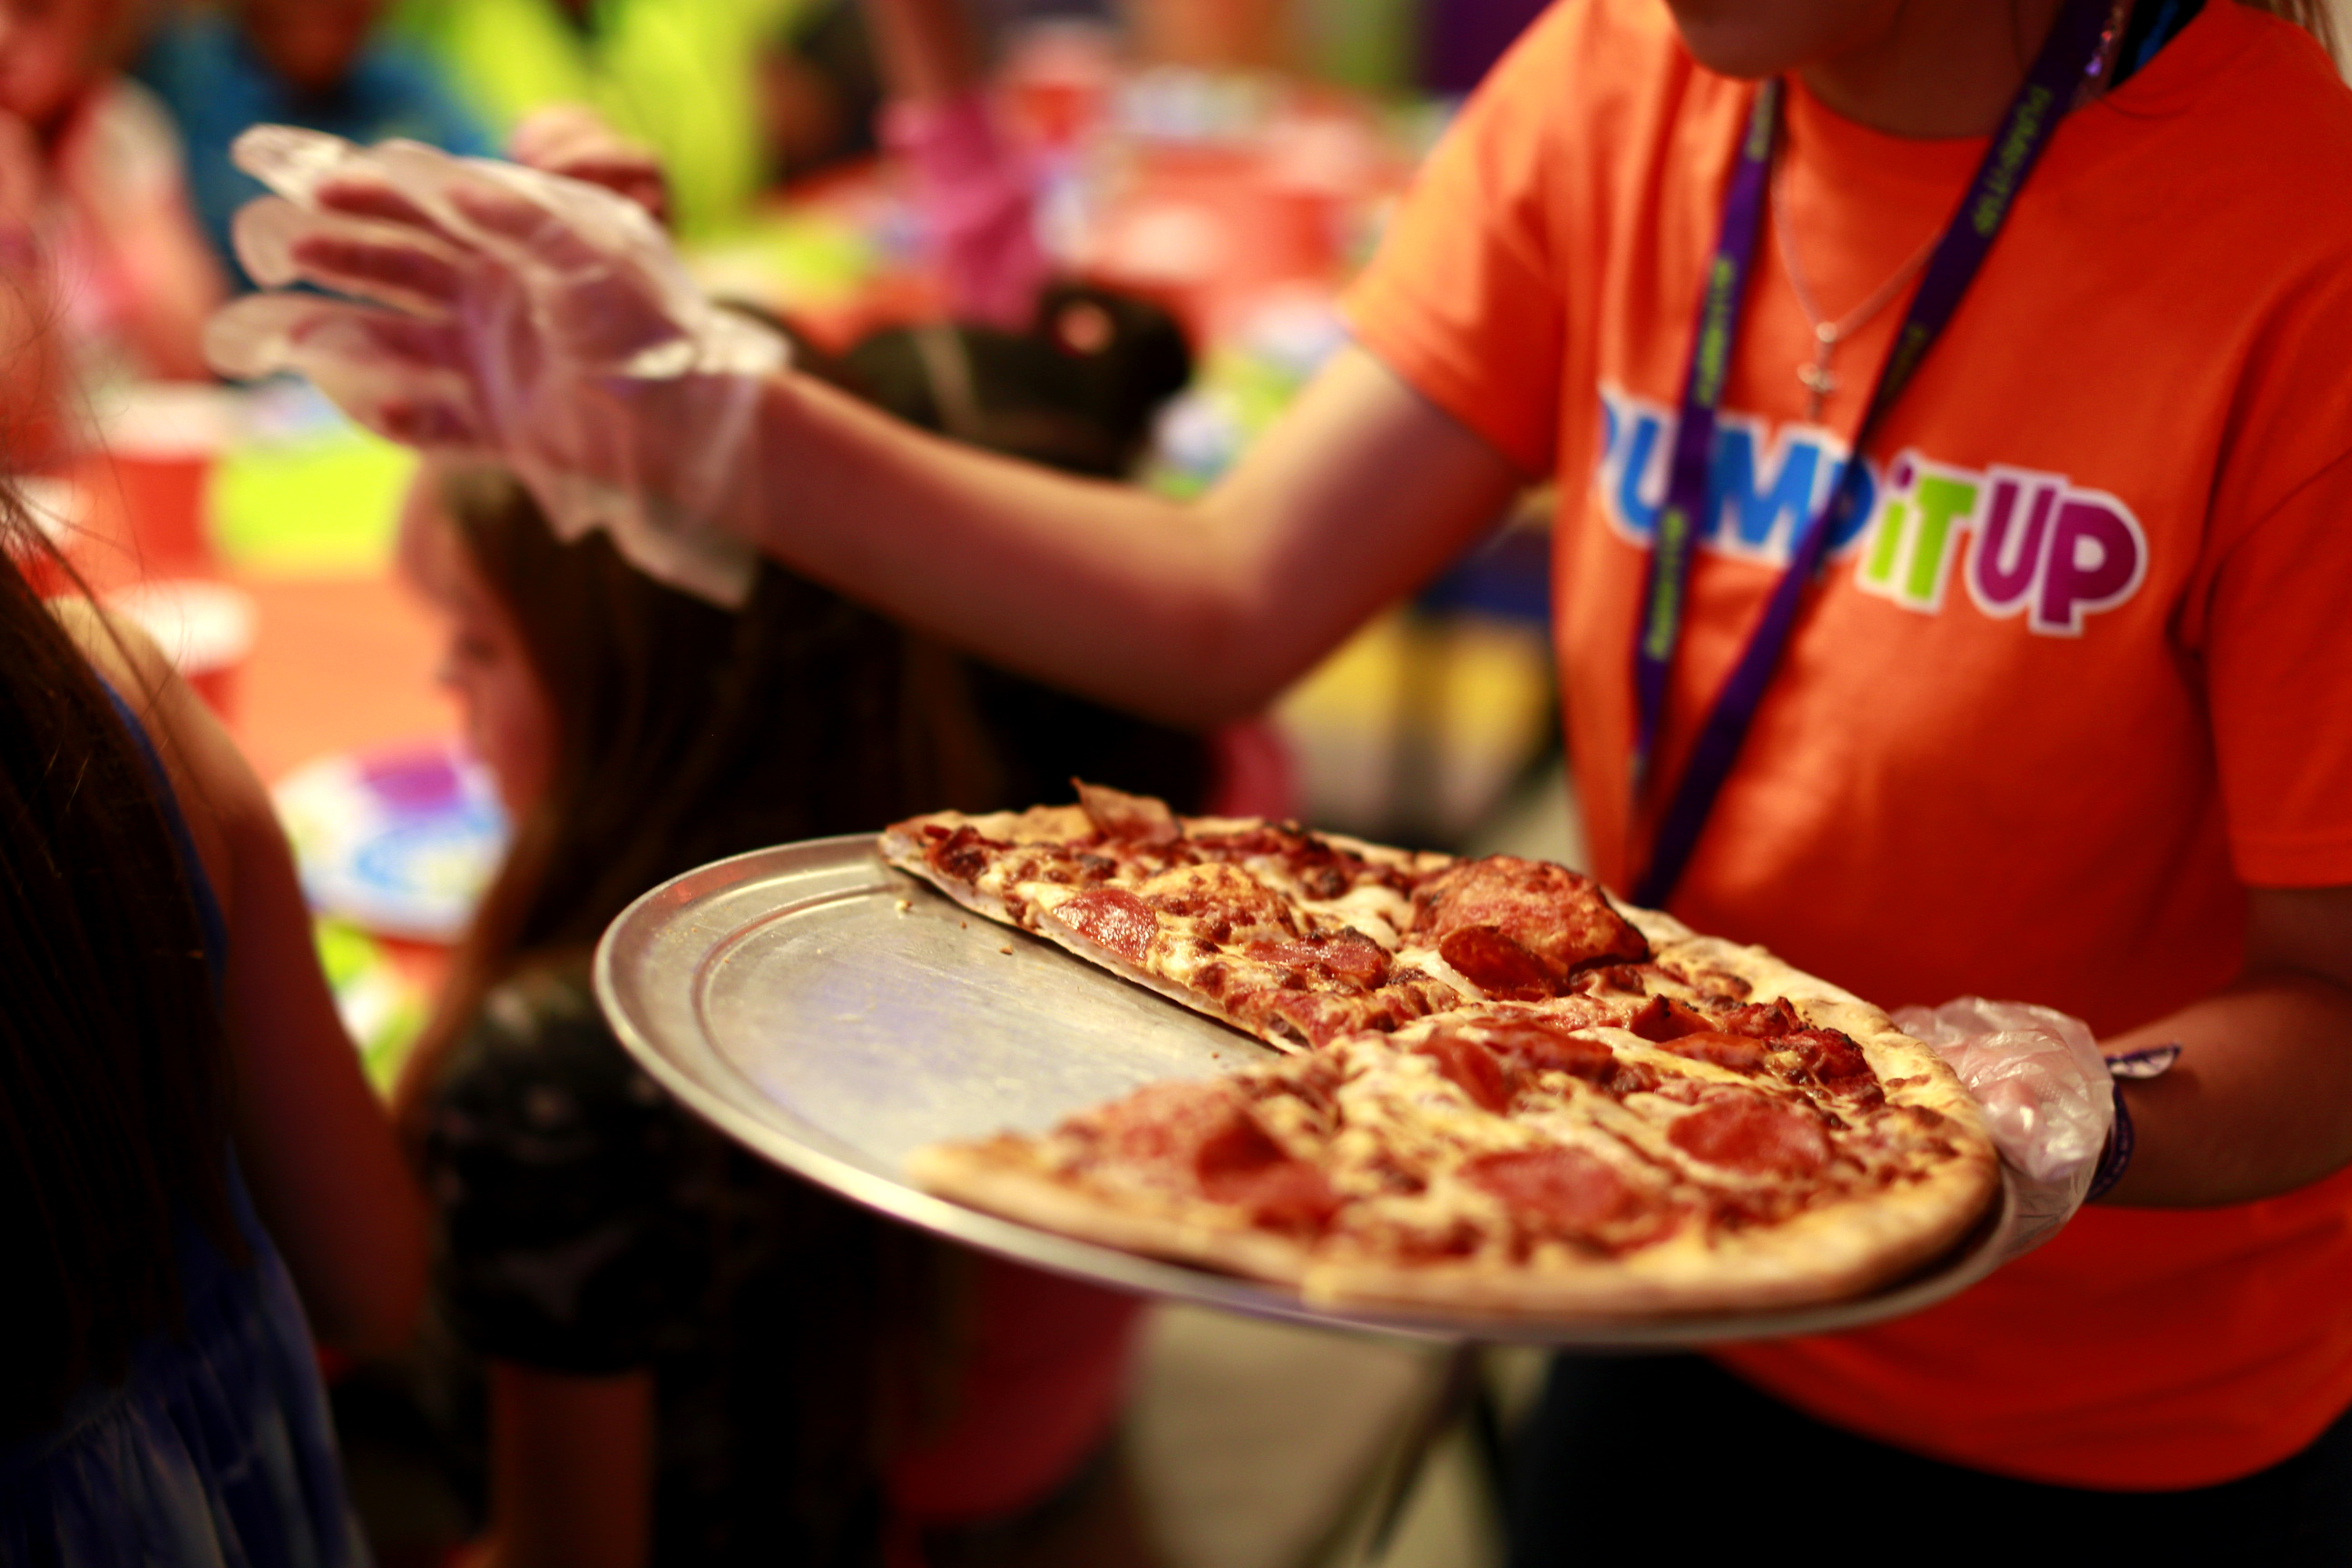 Pump it up staff handing out pizza